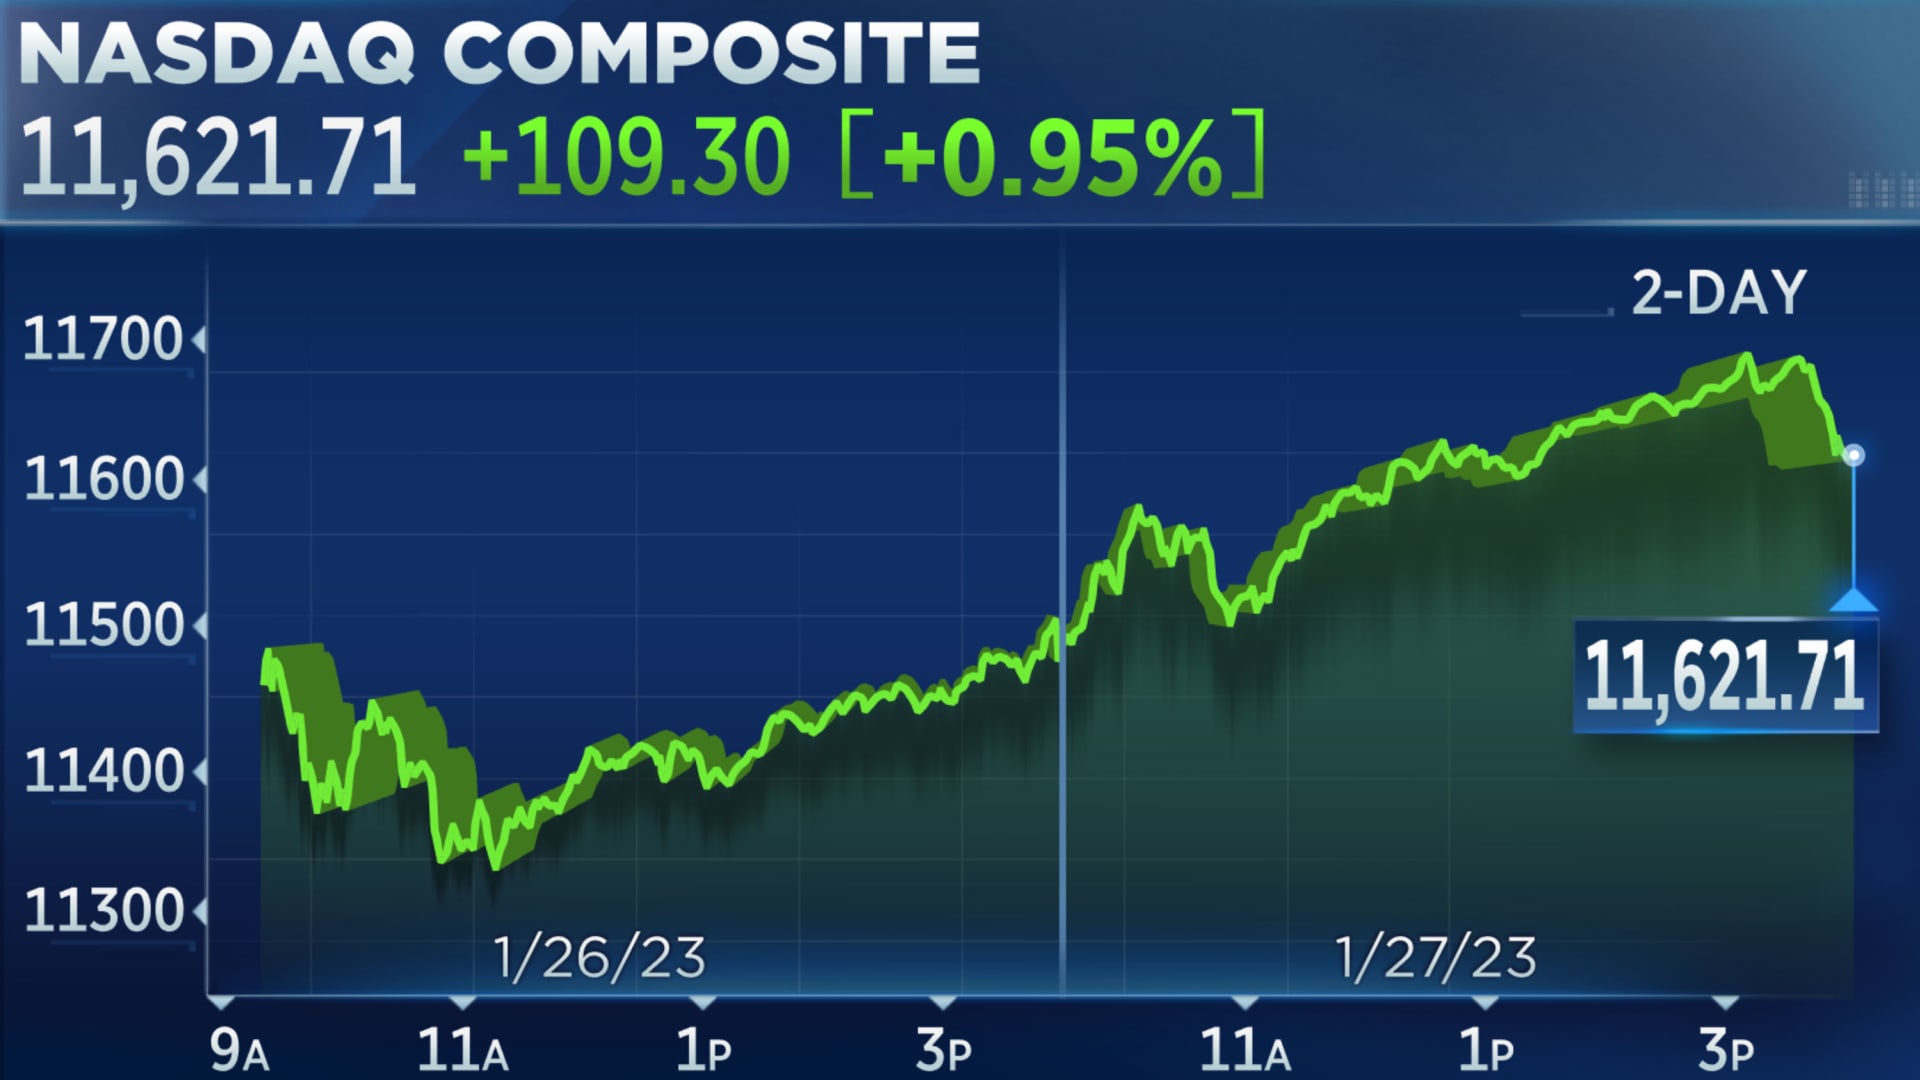 Stocks closed higher on Friday, and Nasdaq posted its fourth week of gains